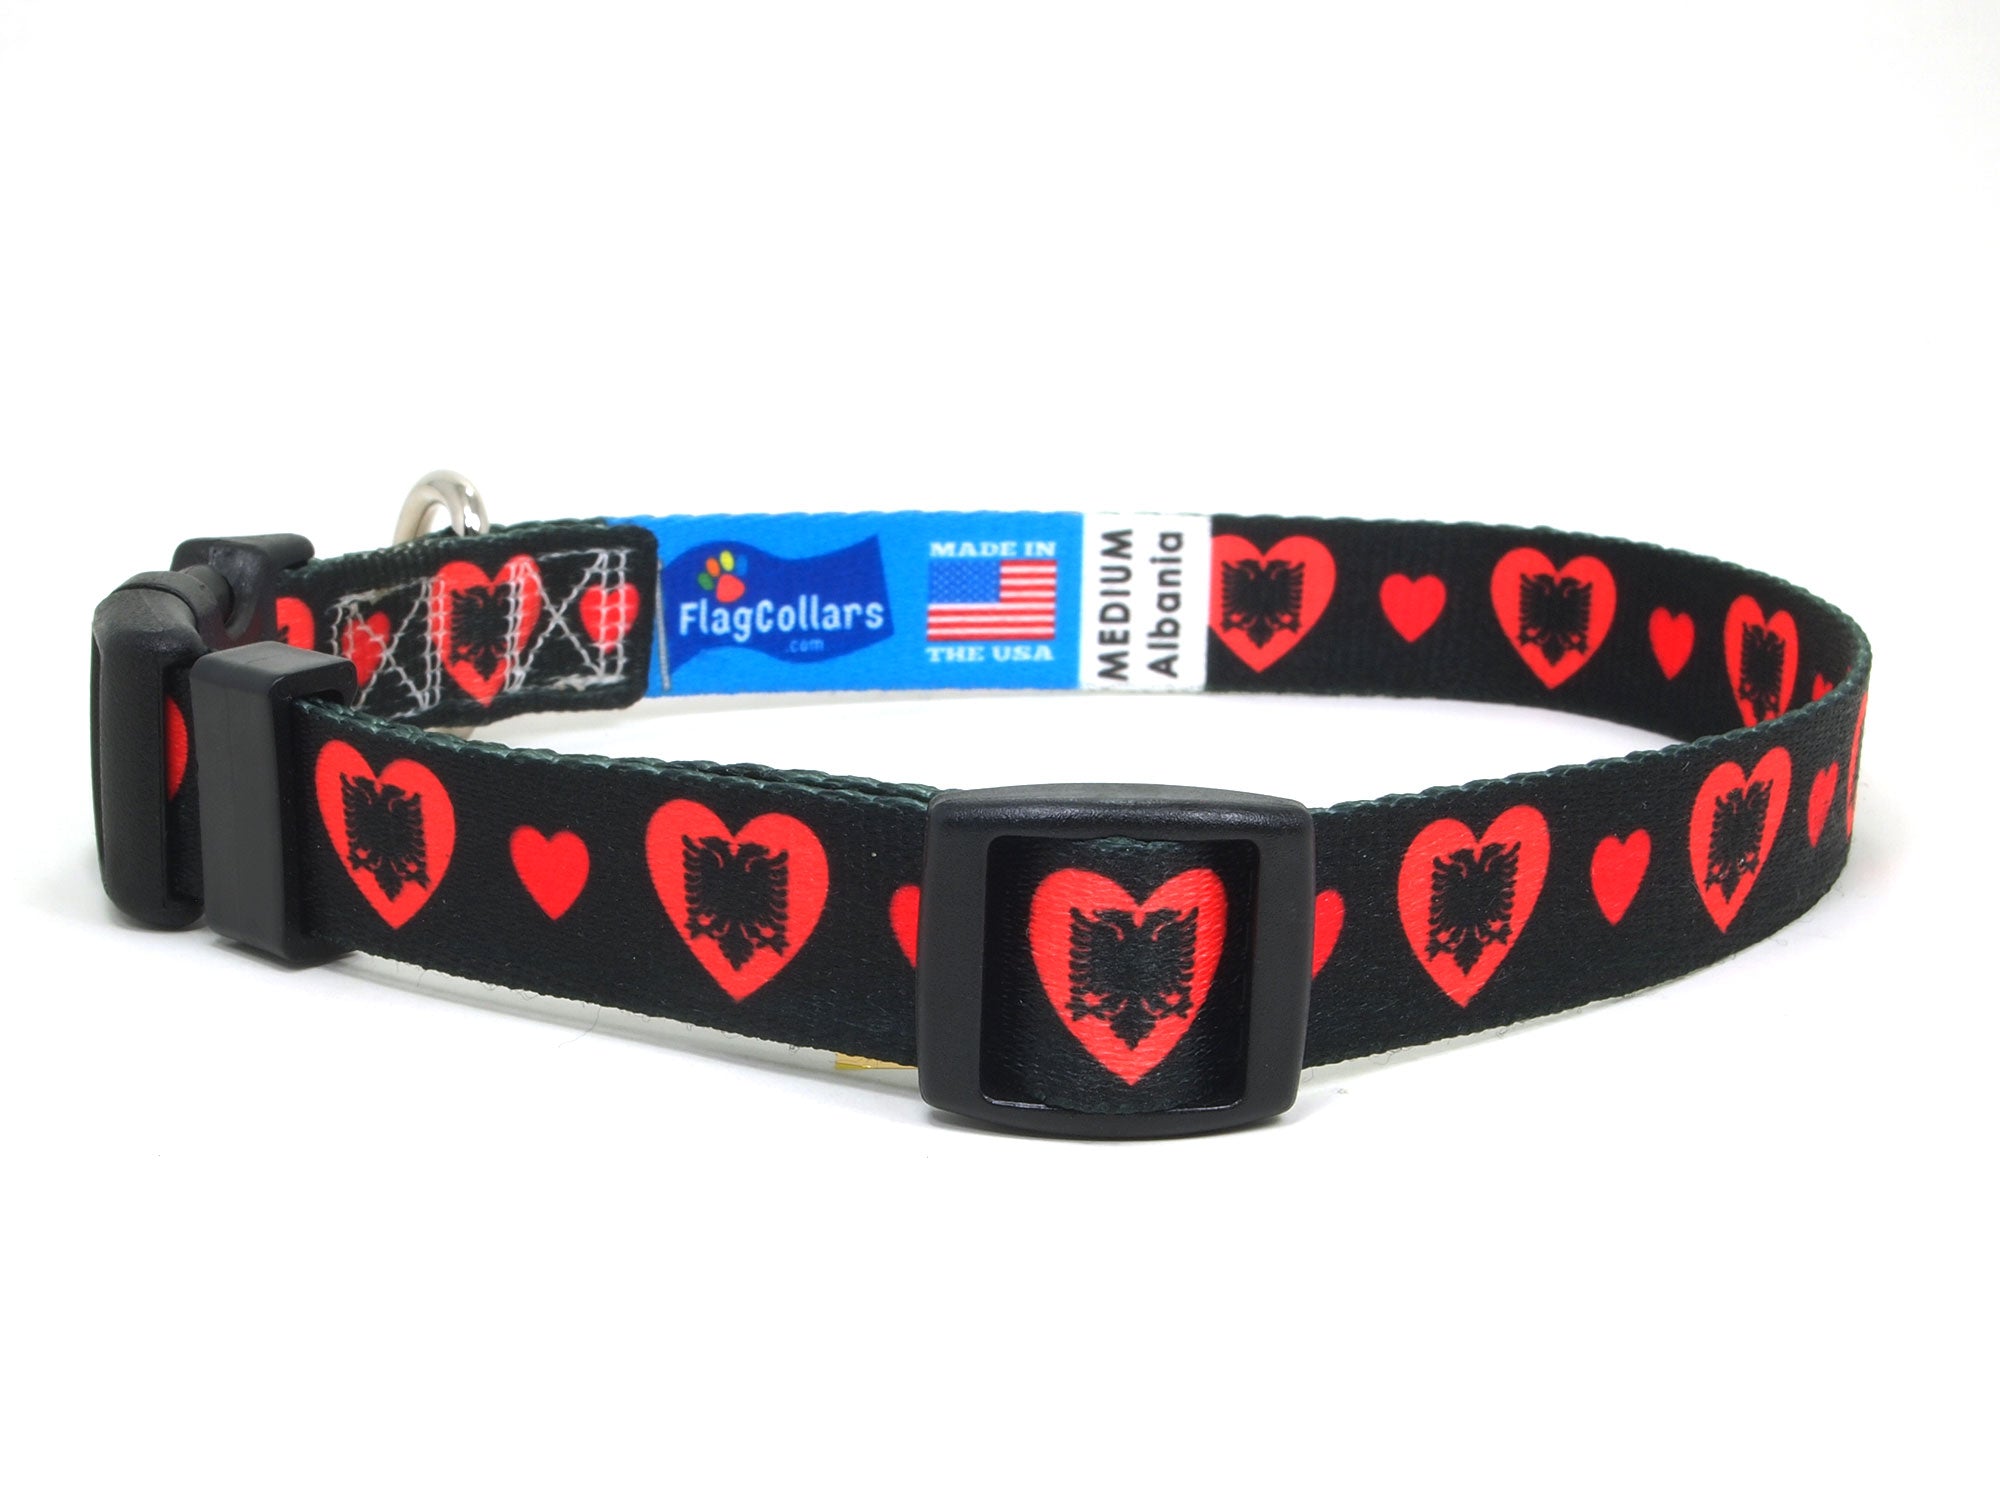 Dog Collar with Albania Hearts Pattern in black